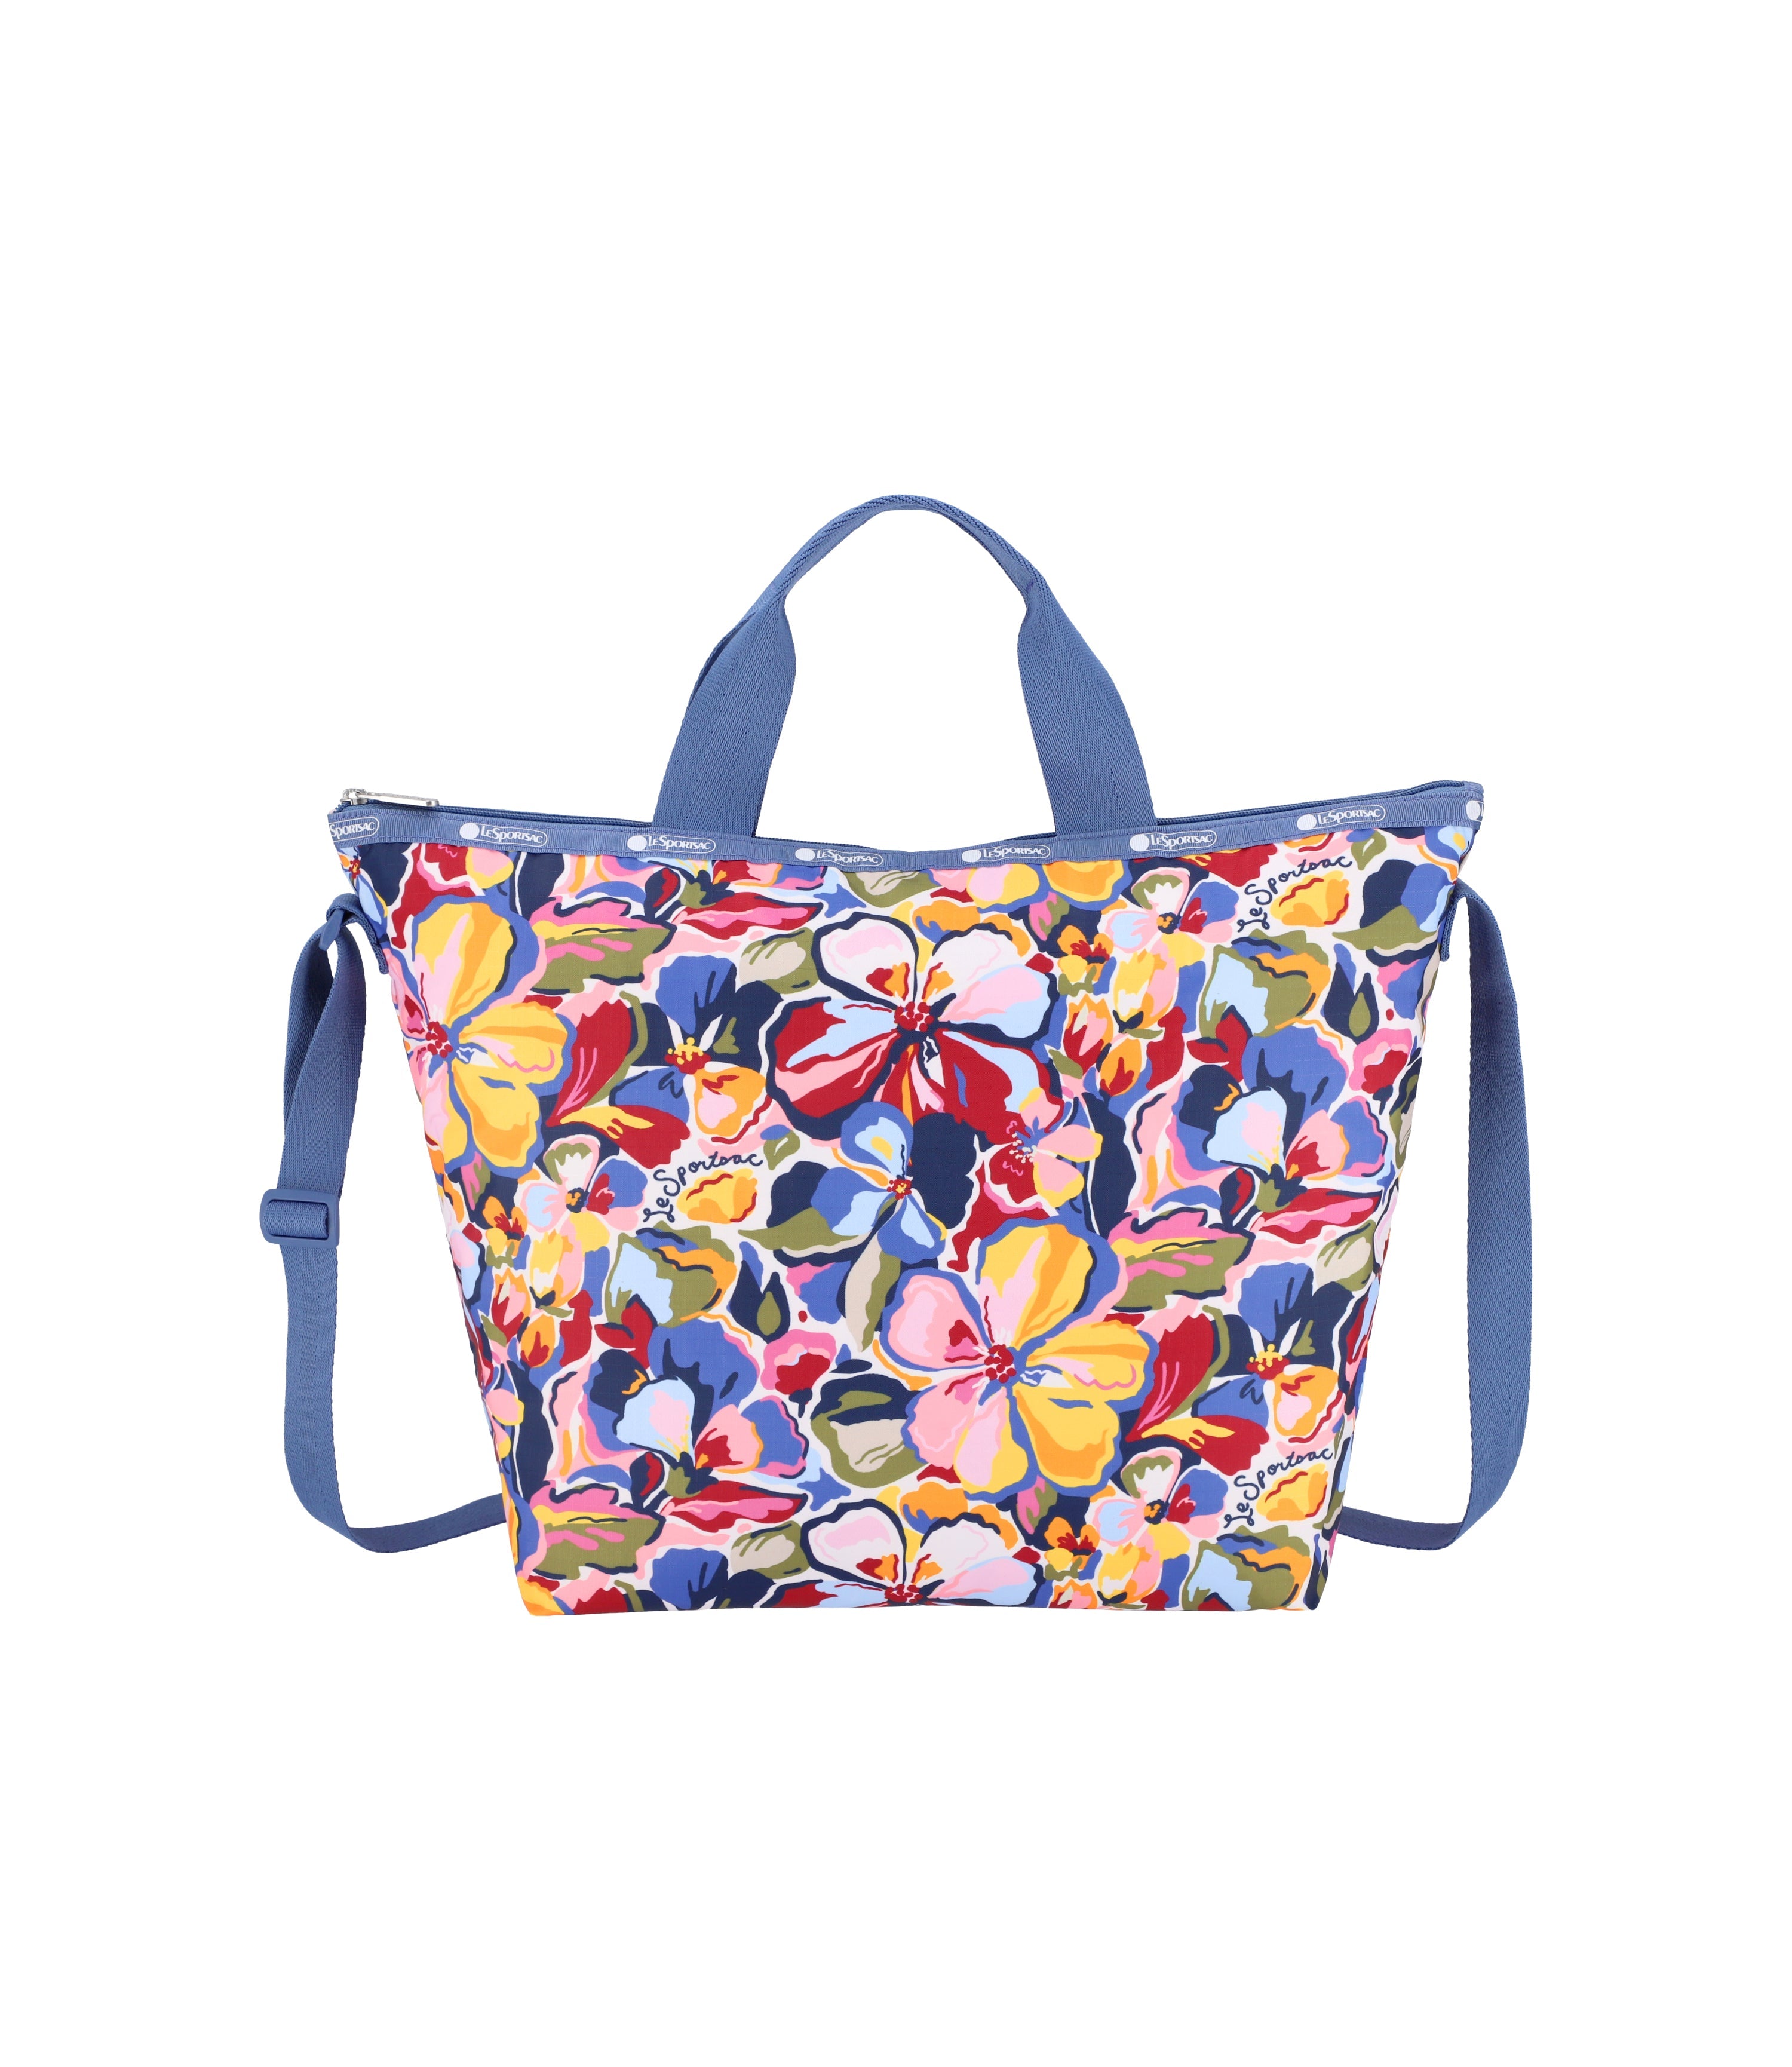 Lesportsac Deluxe Easy Carry Tote - Autumn Floral Print